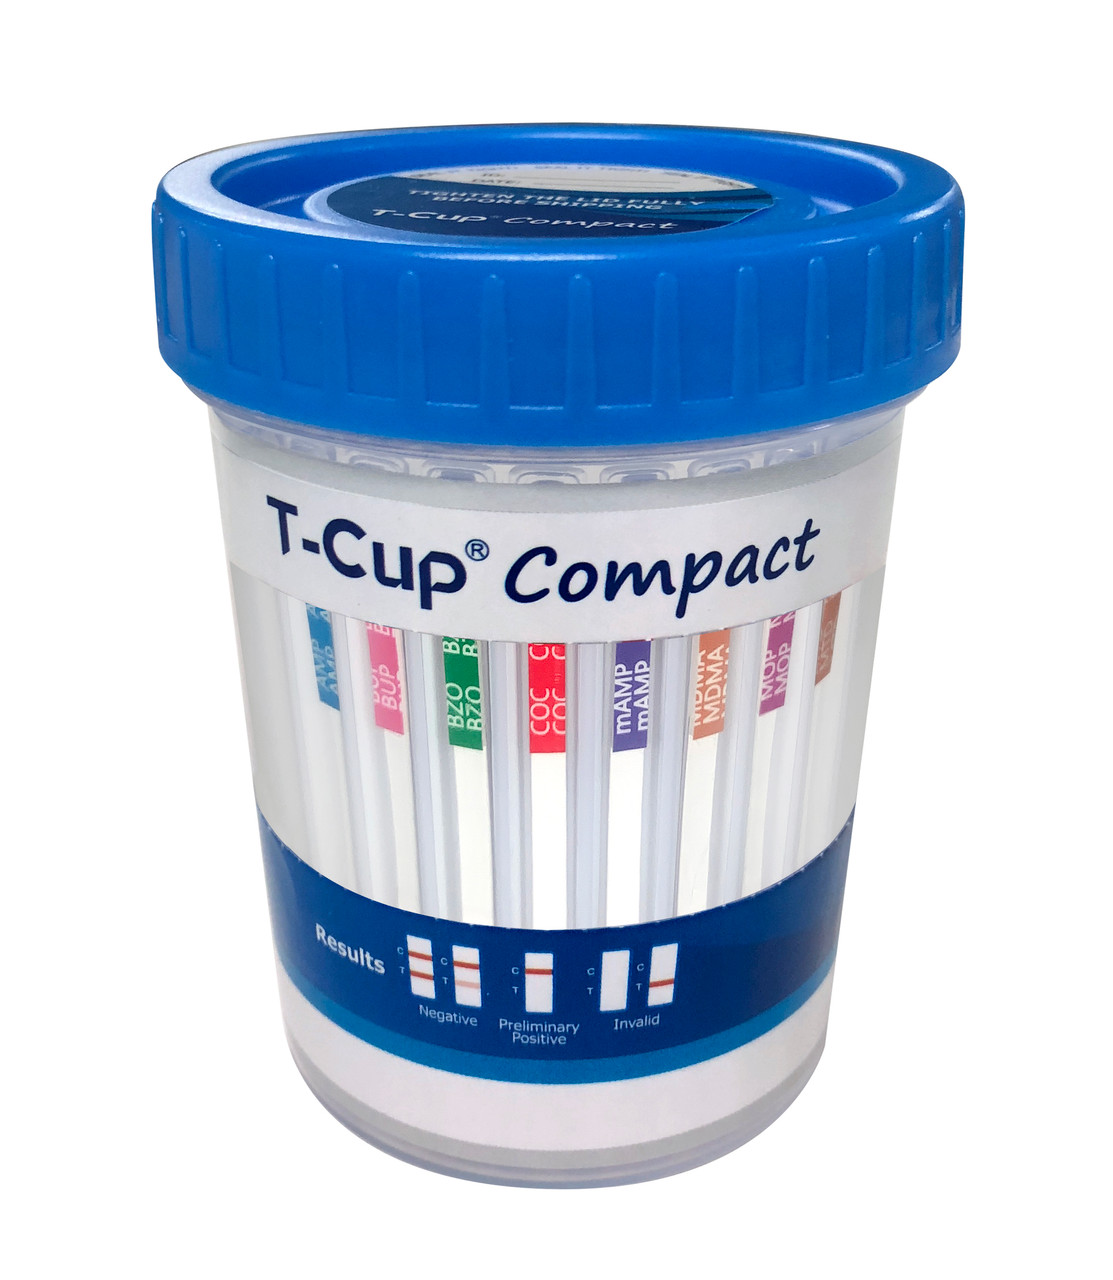 12 Panel Drug Test Cup - Test For 12 Drugs - FDA CLIA Waived